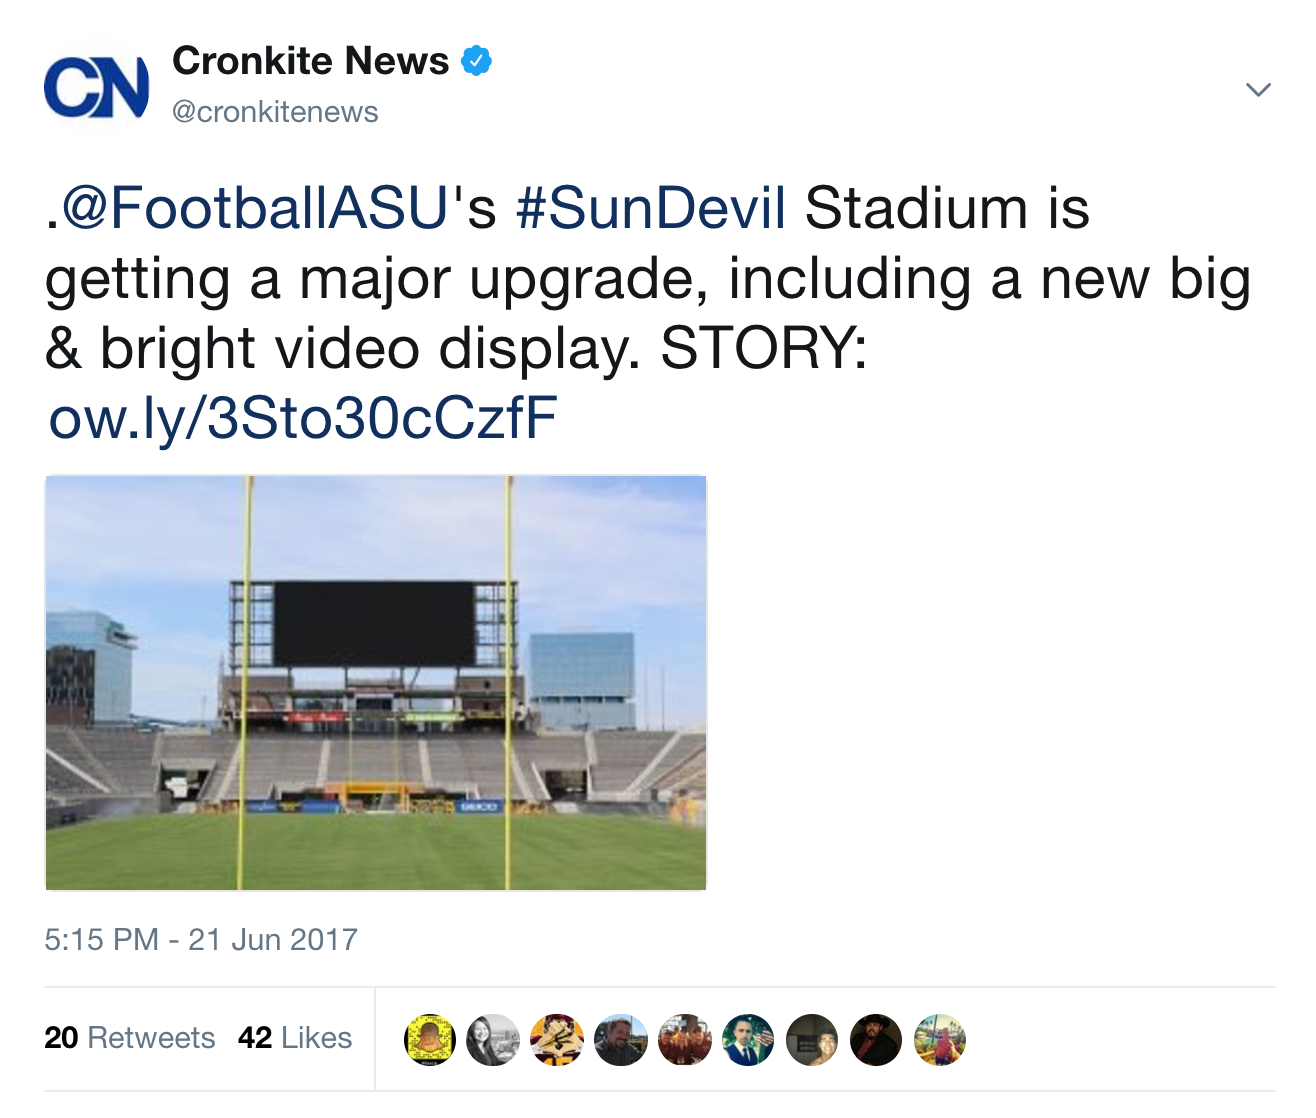 Tweet from Cronkite News (@cronkitenews) at 5:15PM, 21 June 2017, that reads: ".@FootballASU's #SunDevil Stadium is getting a major upgrade, including a new big & bright video display. STORY: ow.ly/3Sto30cCzfF" and is accompanied by na image of the large screen at the Sen Devil Stadium.The tweet has 20 retweets and 42 likes.